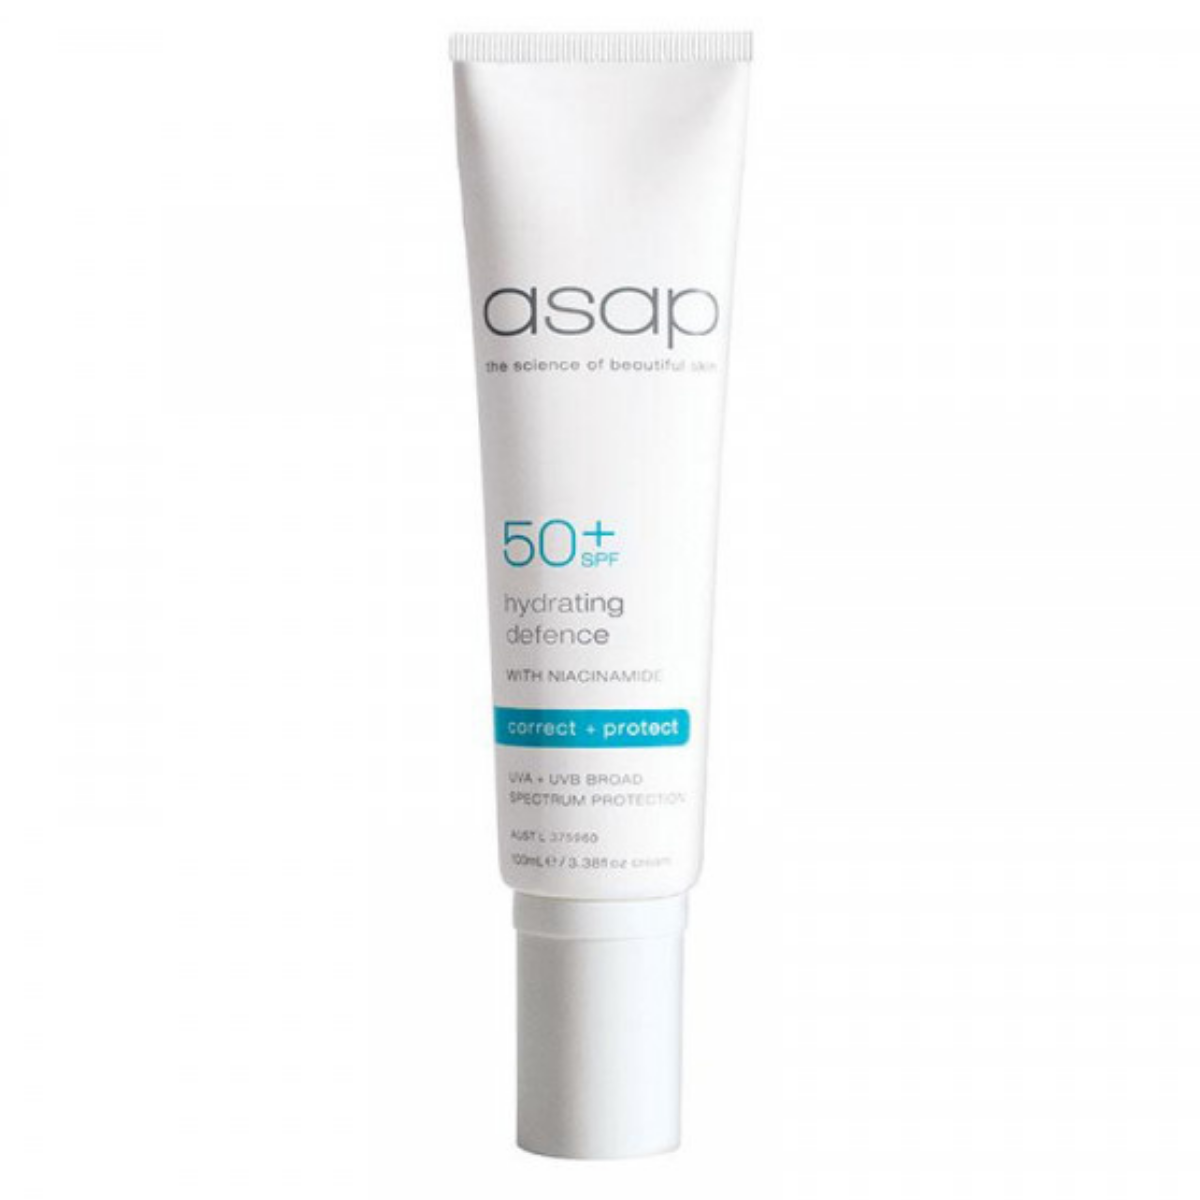 ASAP Hydrating Defence SPF50+ Correct and Protect 100ml